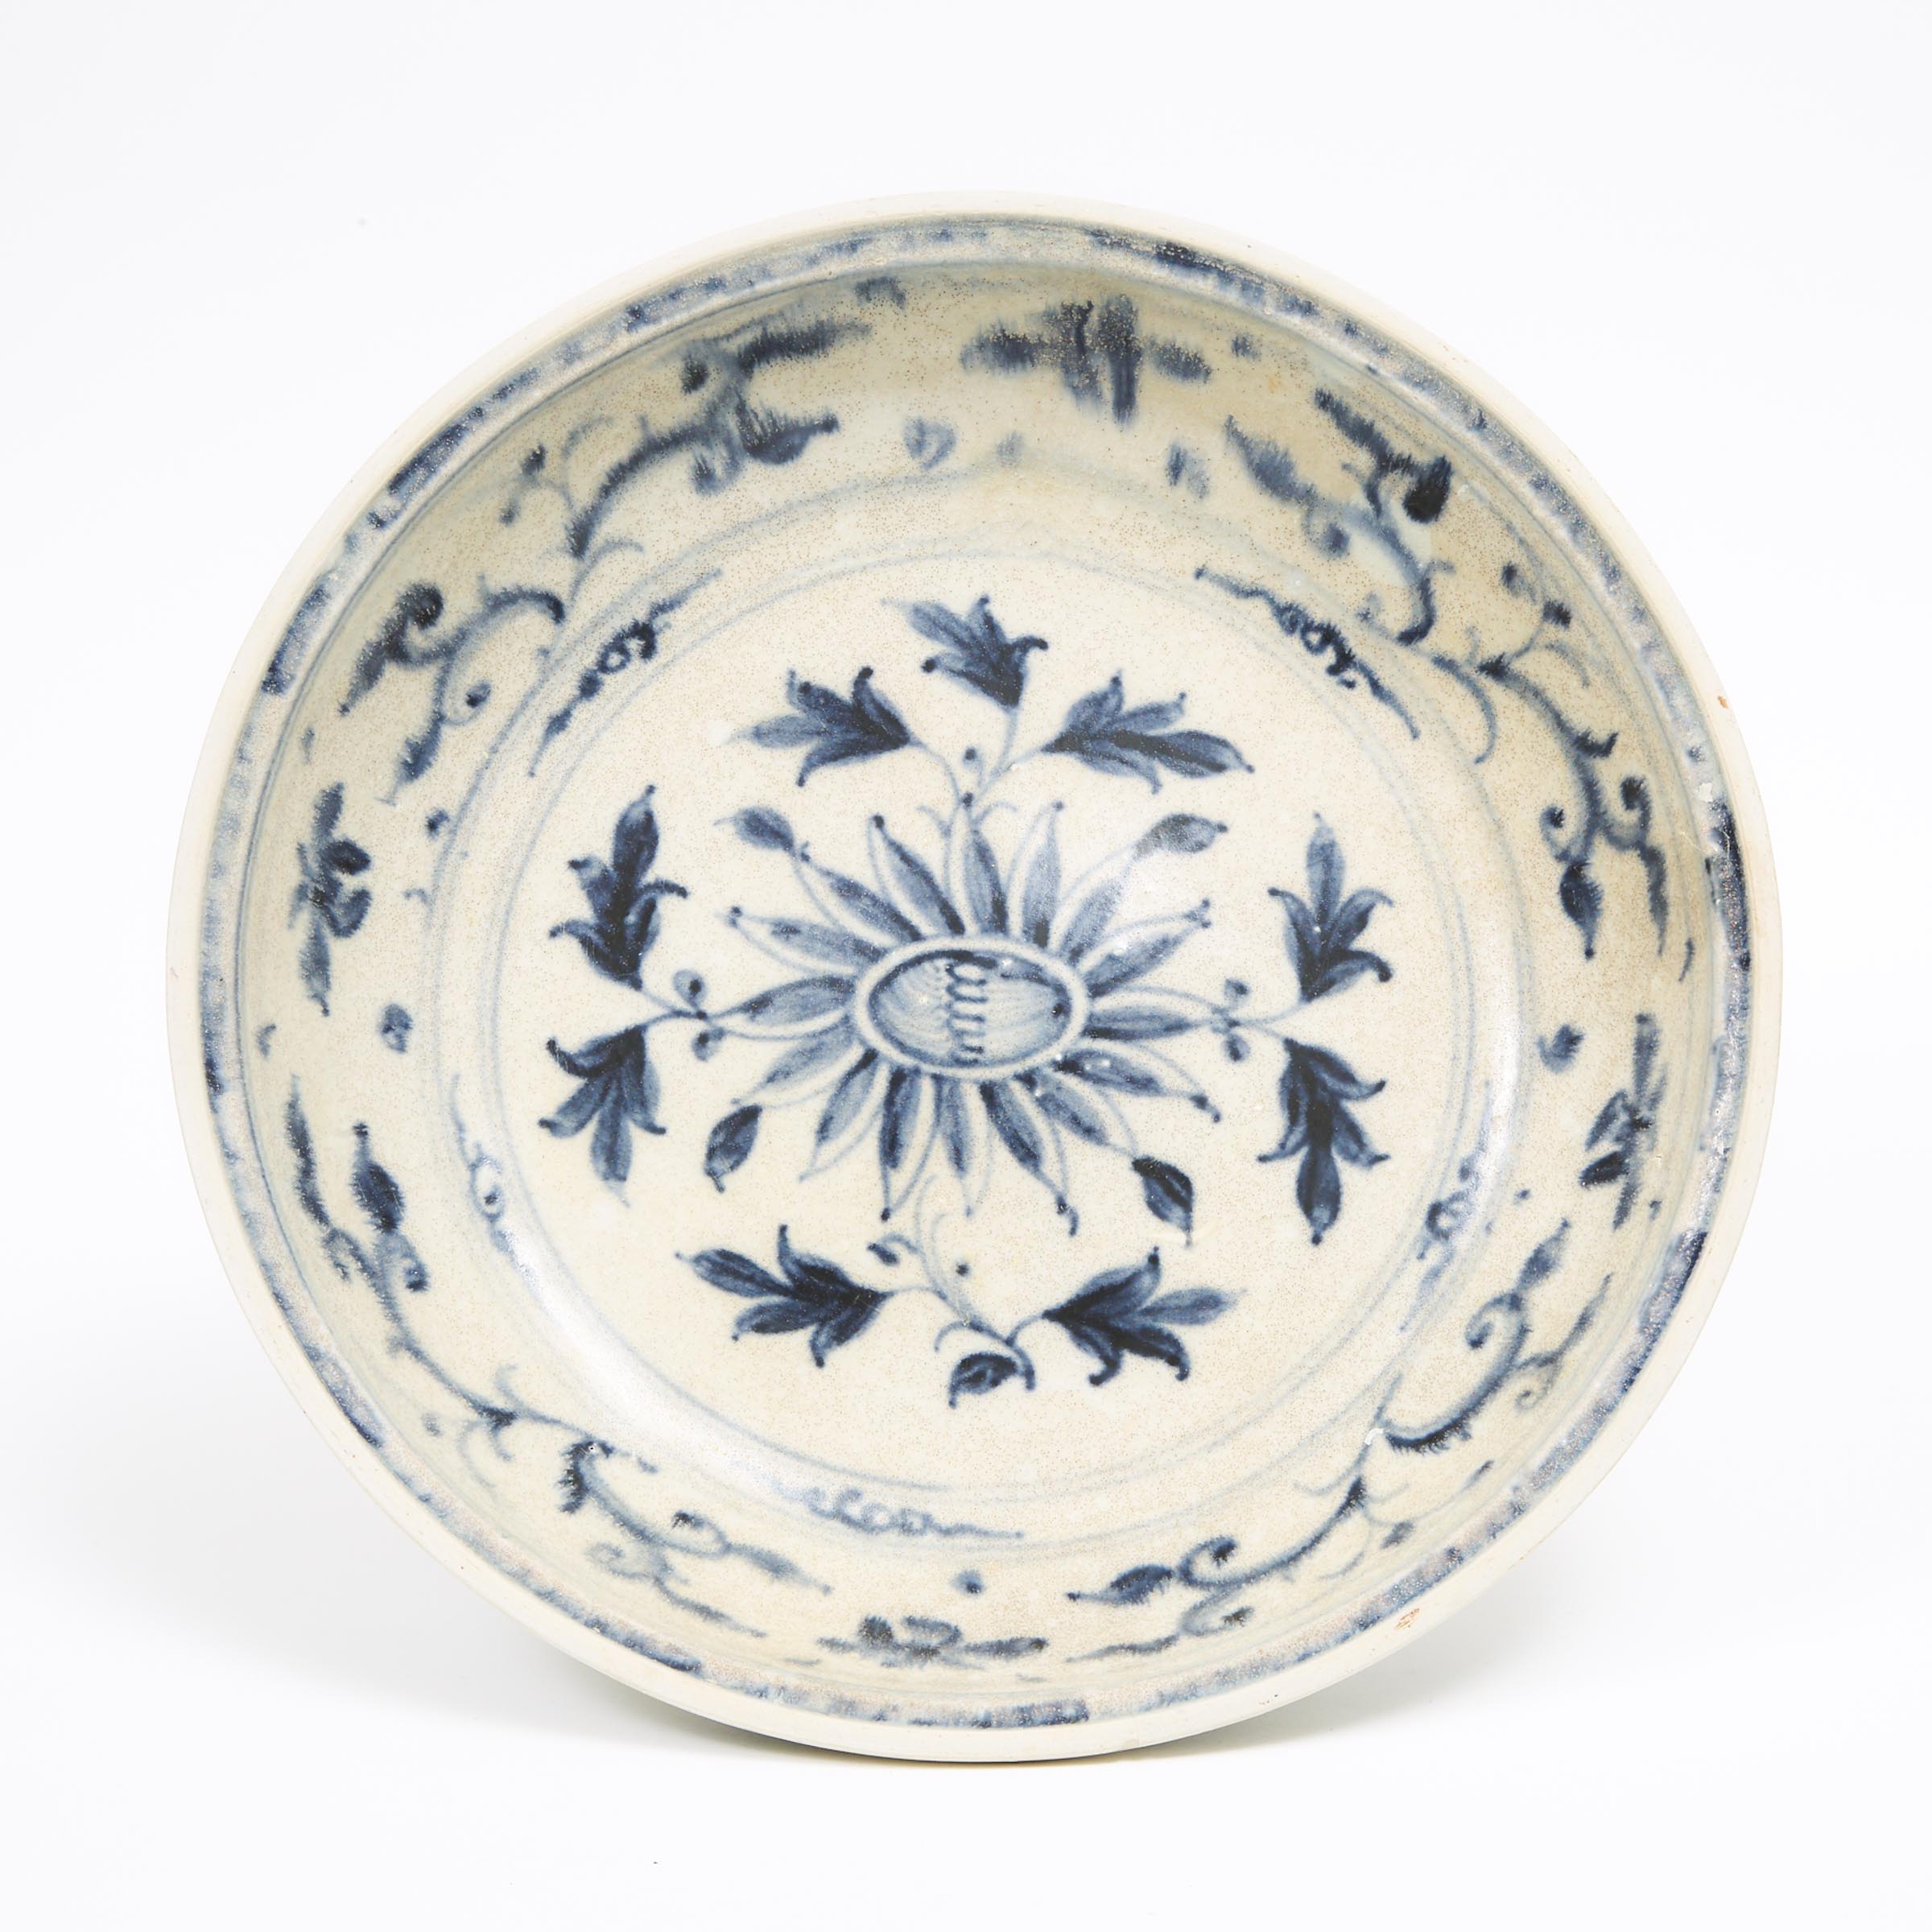 A Vietnamese 'Hoi An Hoard' Blue and White Charger, 15th Century